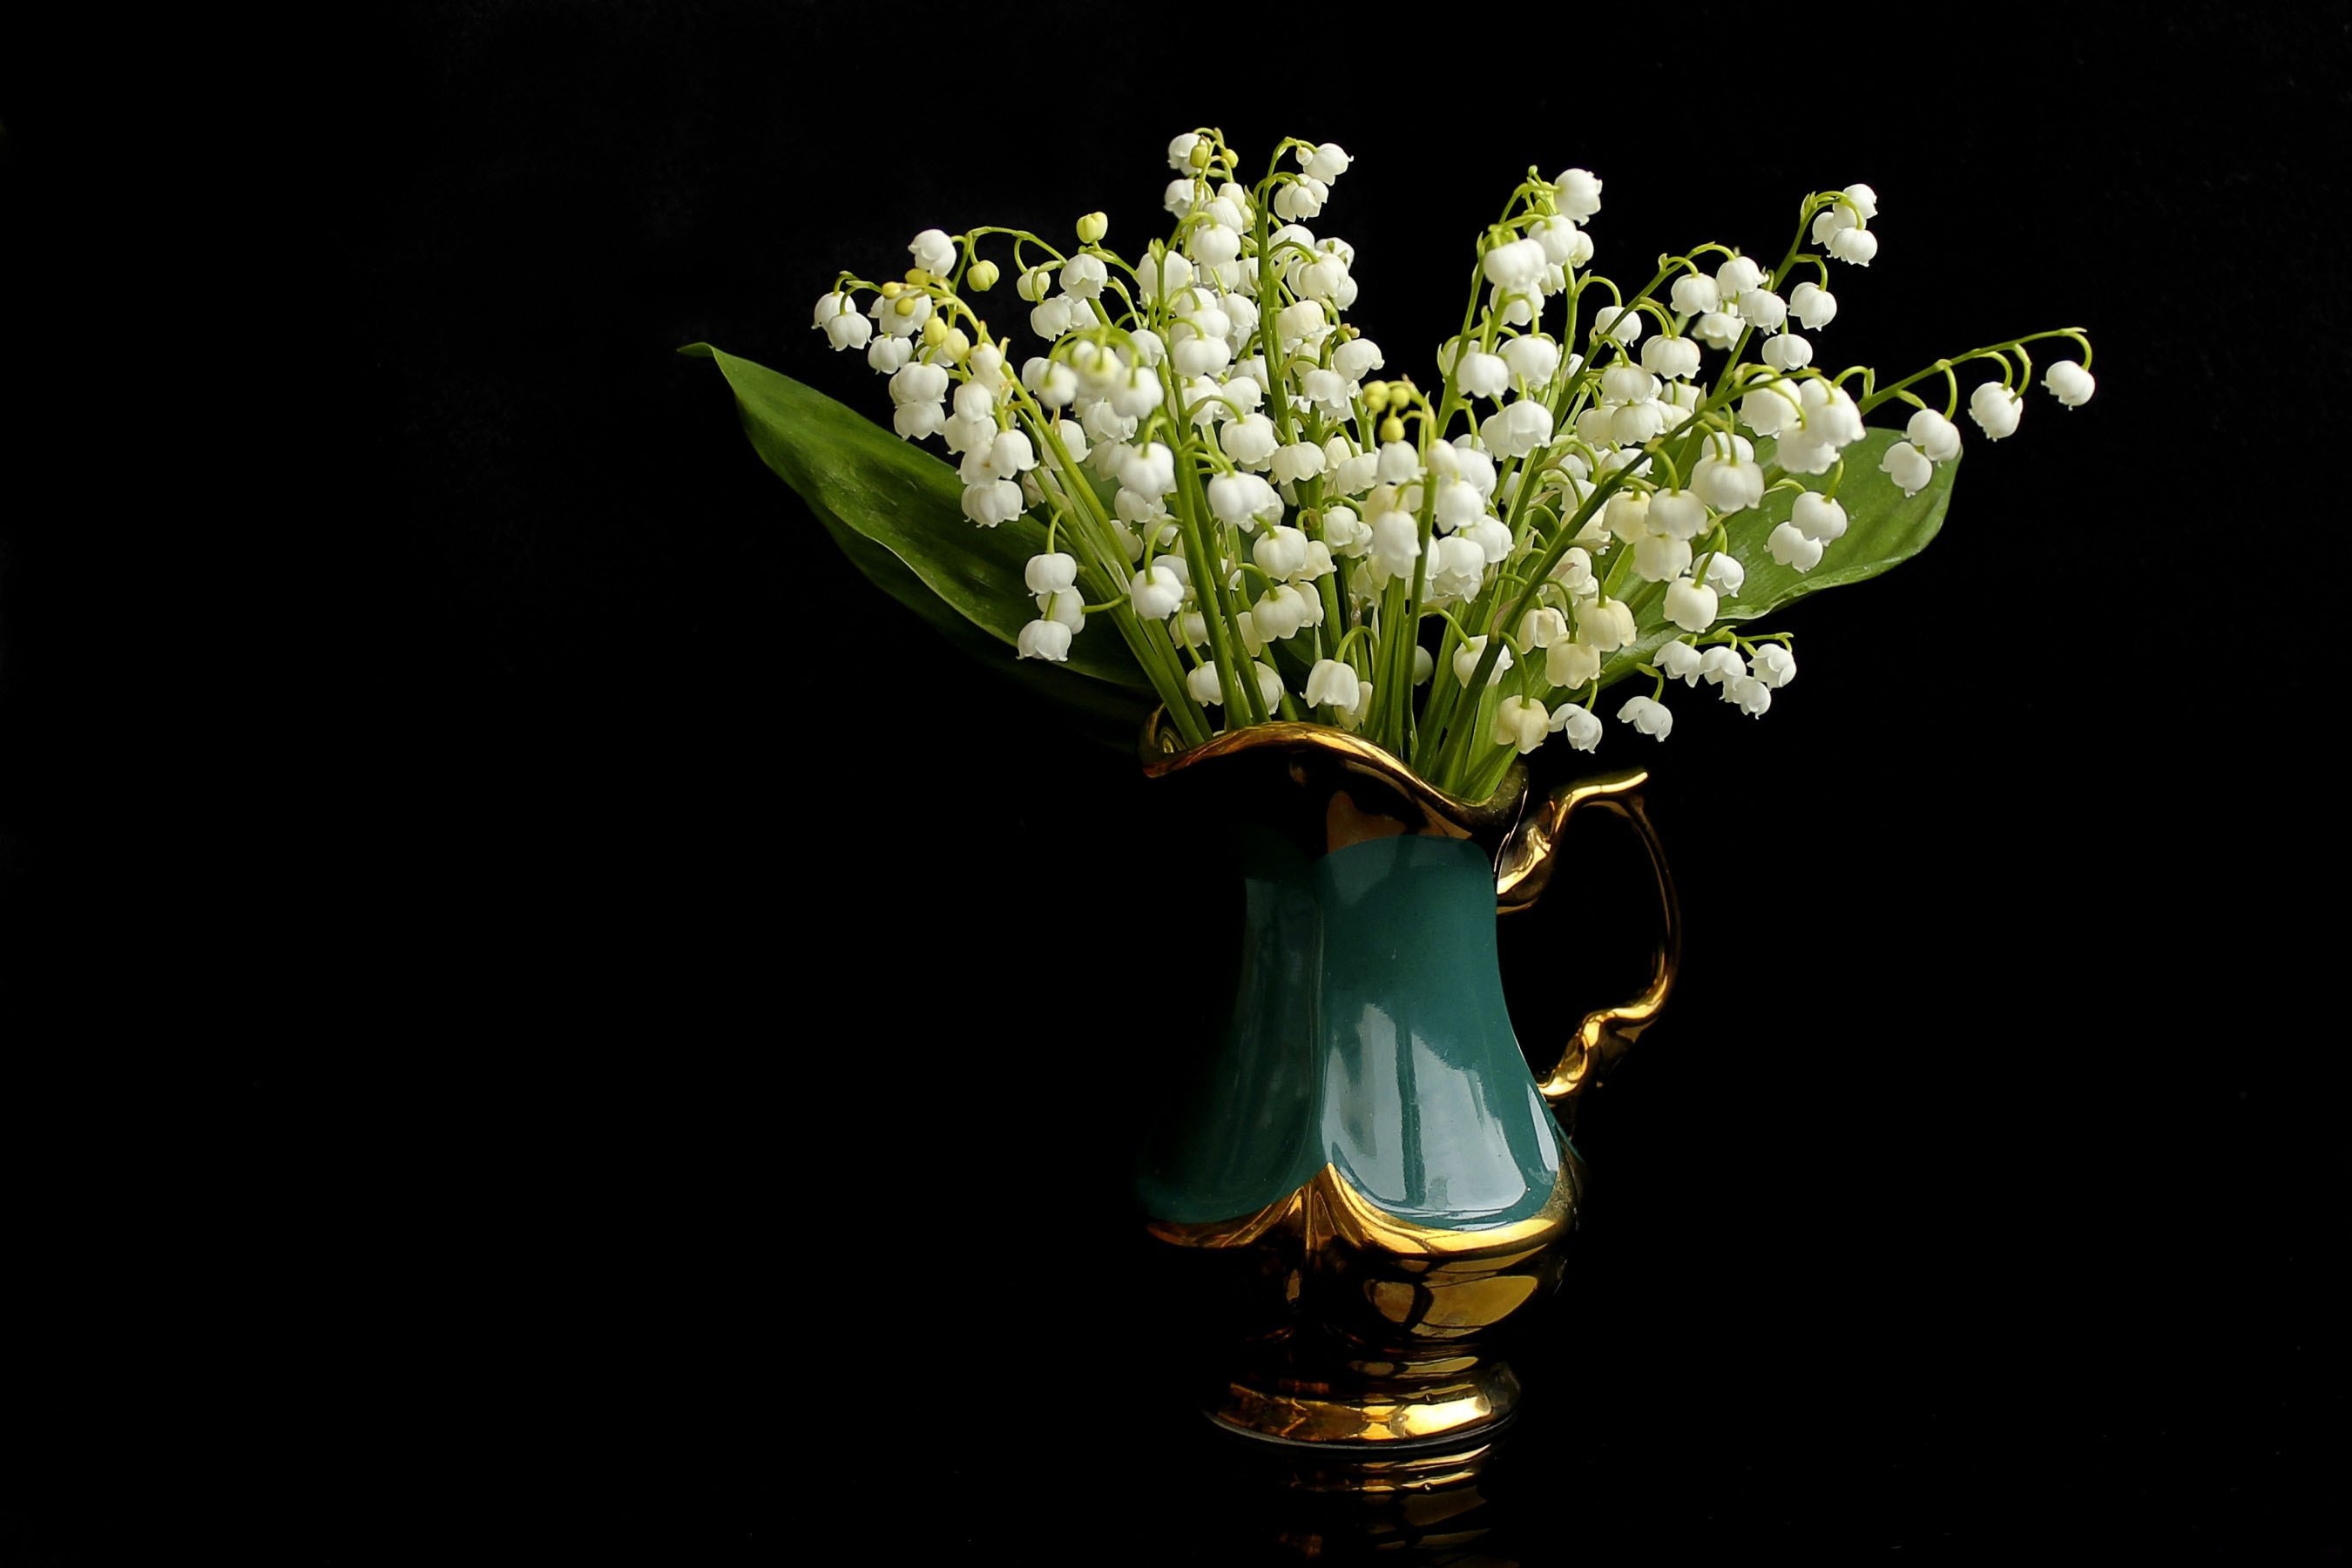 lily of the valley, man made, flower, pitcher, white flower